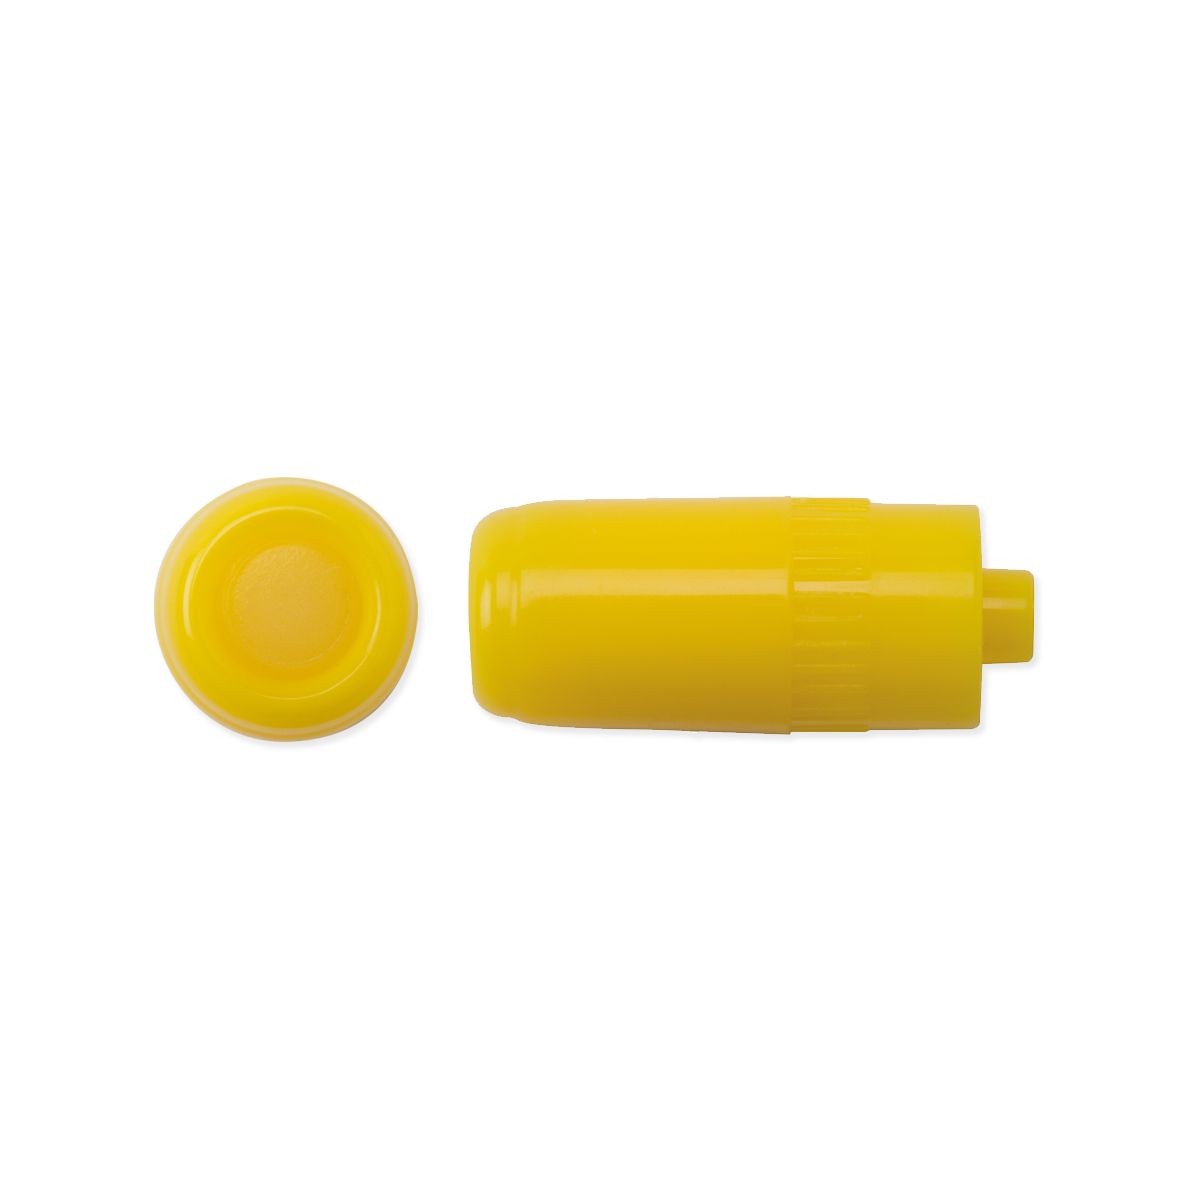 Tappino Injection Stopper – Combi Stopper in ABS